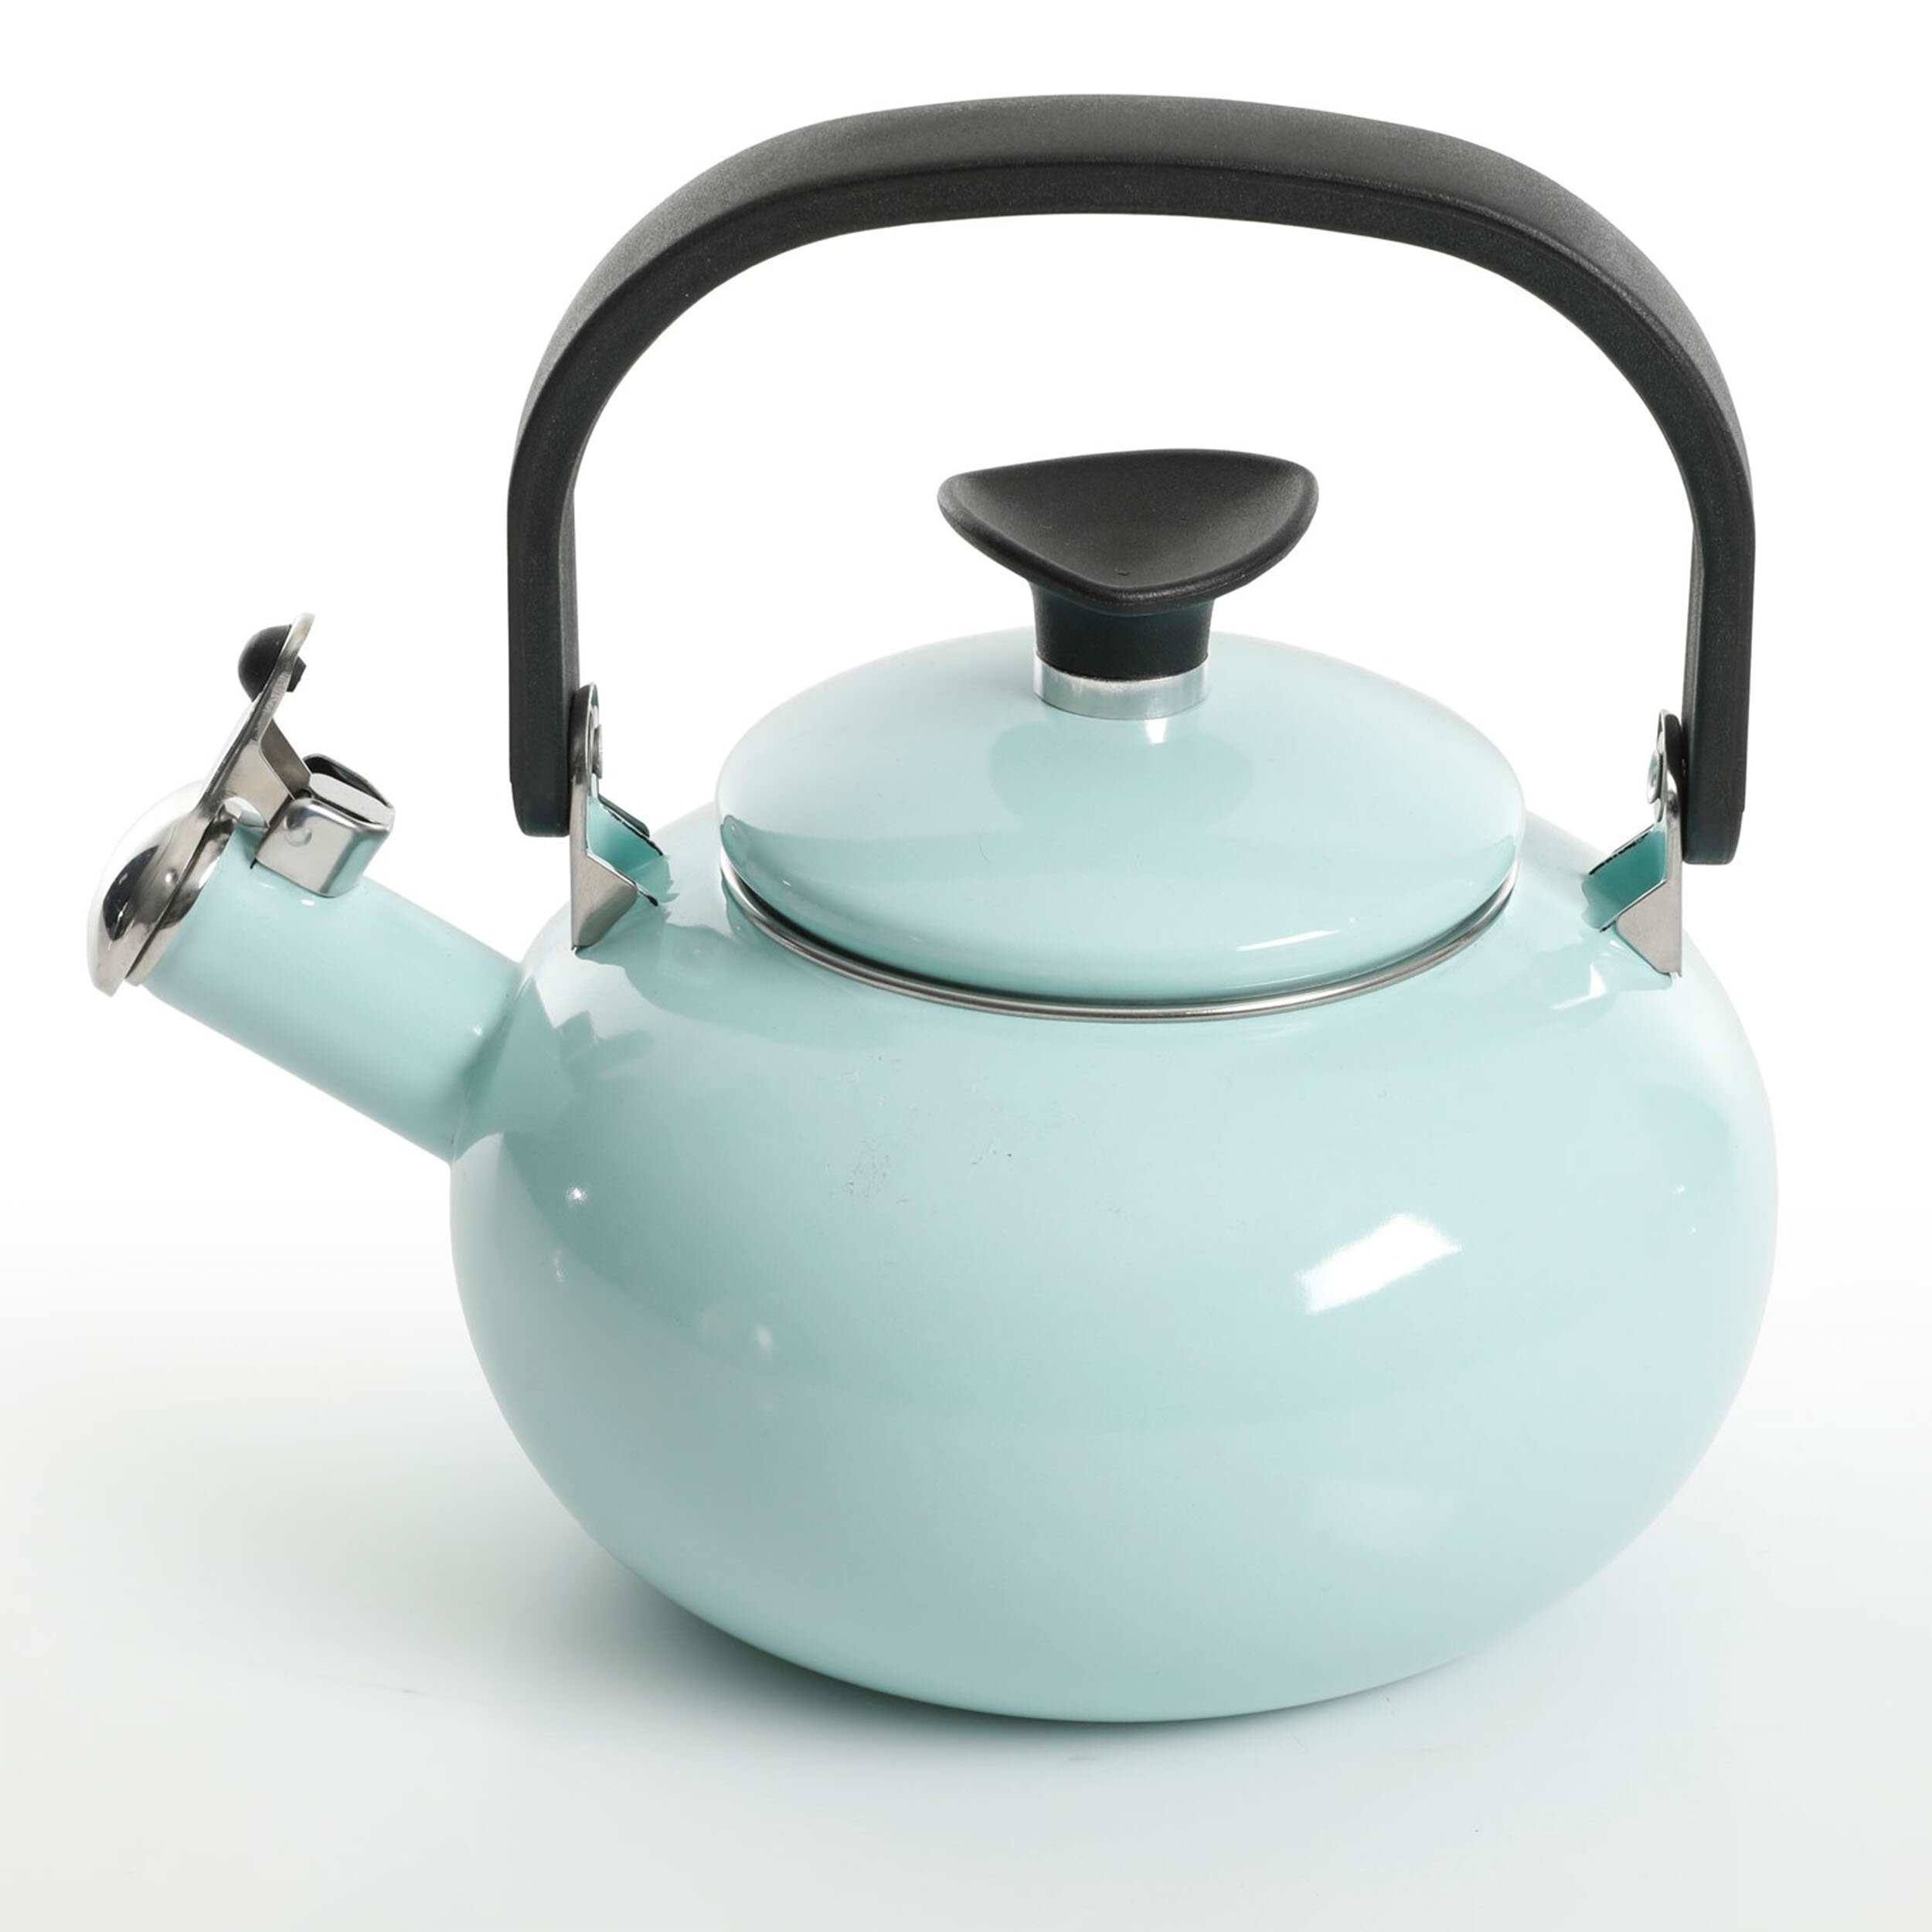 Kenmore 1.5 Quarts Stainless Steel Whistling Stovetop Tea Kettle & Reviews